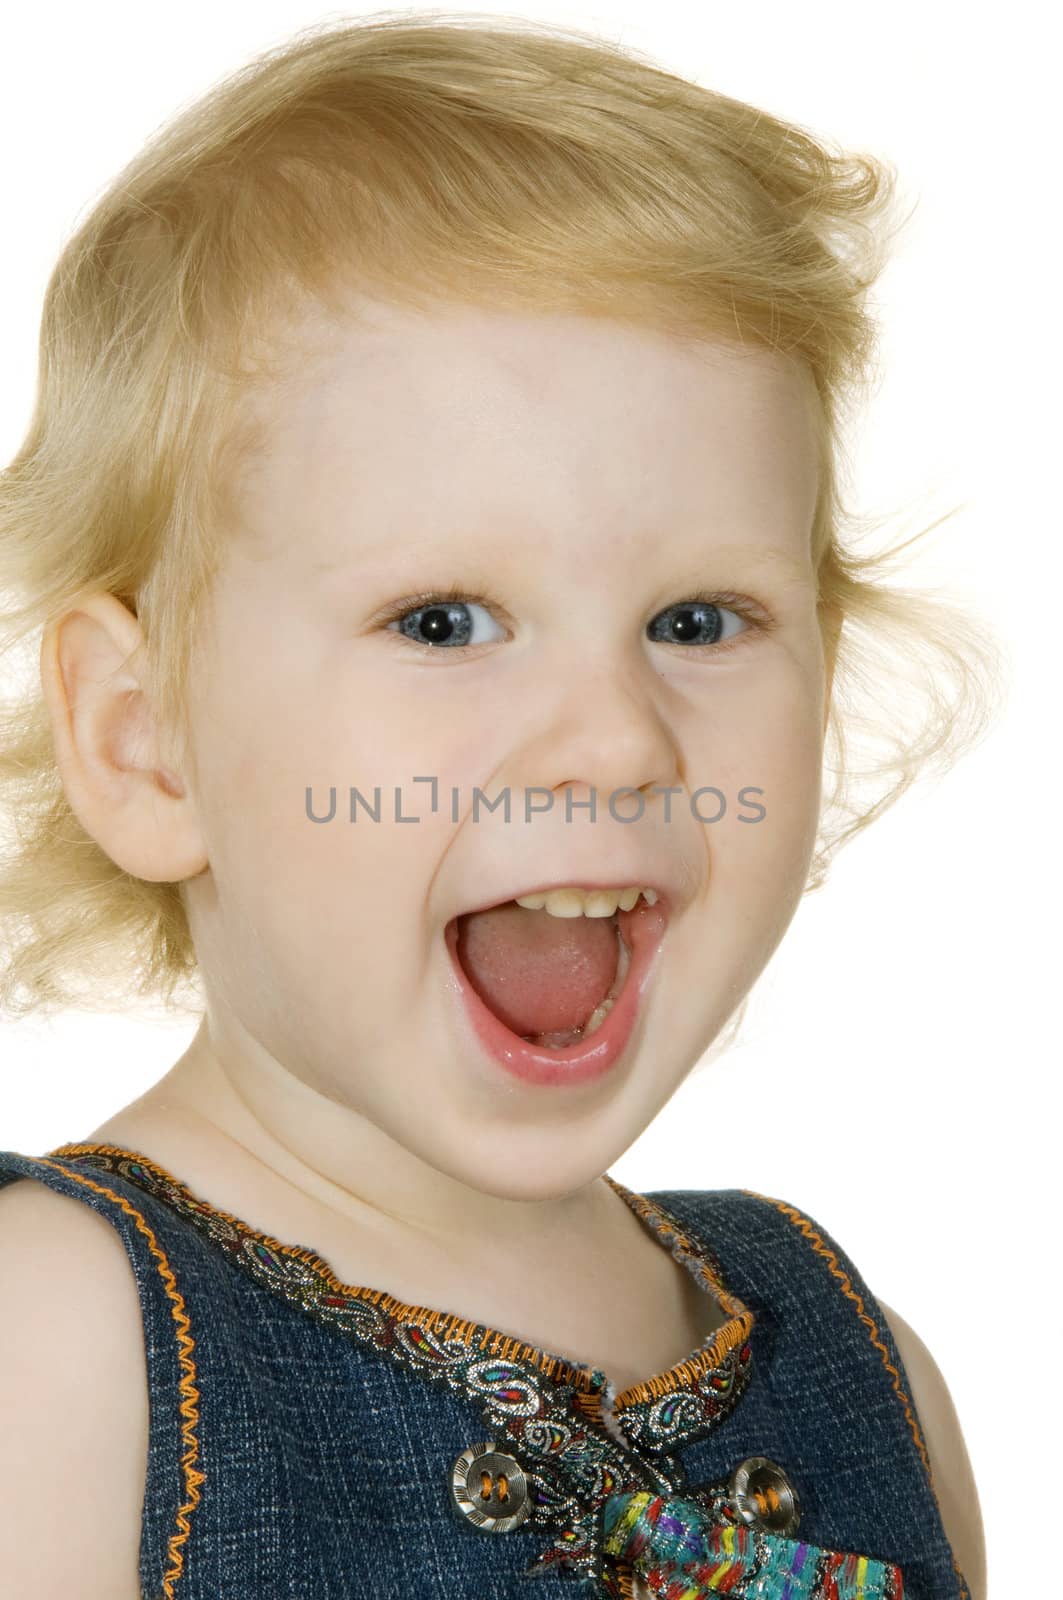 small child smiles insulated on white background